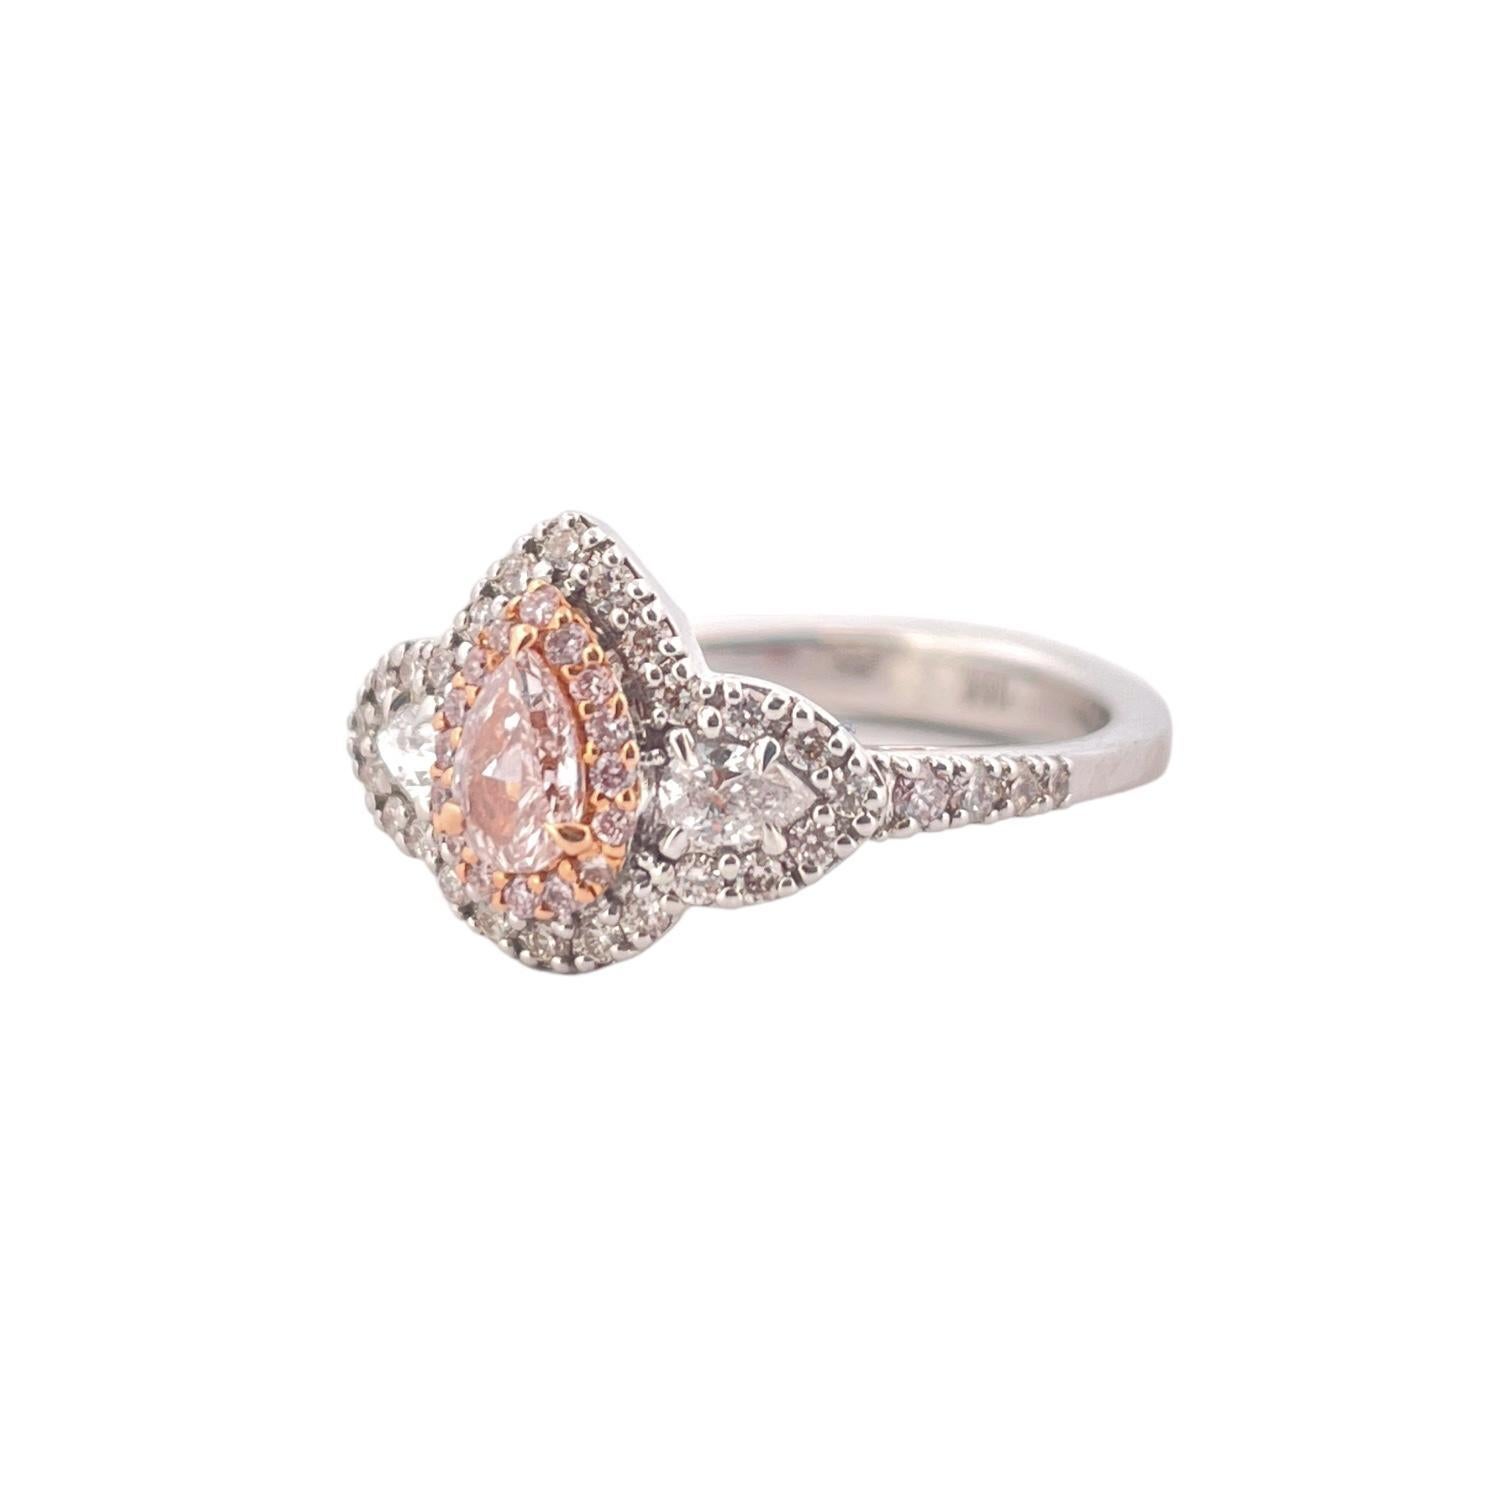 Embrace the elegance of our exceptional Pink Pear Shape Diamond Ring, meticulously crafted in lustrous 18K white gold. This exquisite masterpiece showcases a radiant 0.28CT Natural Fancy Pink Diamond at its heart, brilliantly framed by 0.16TCW White